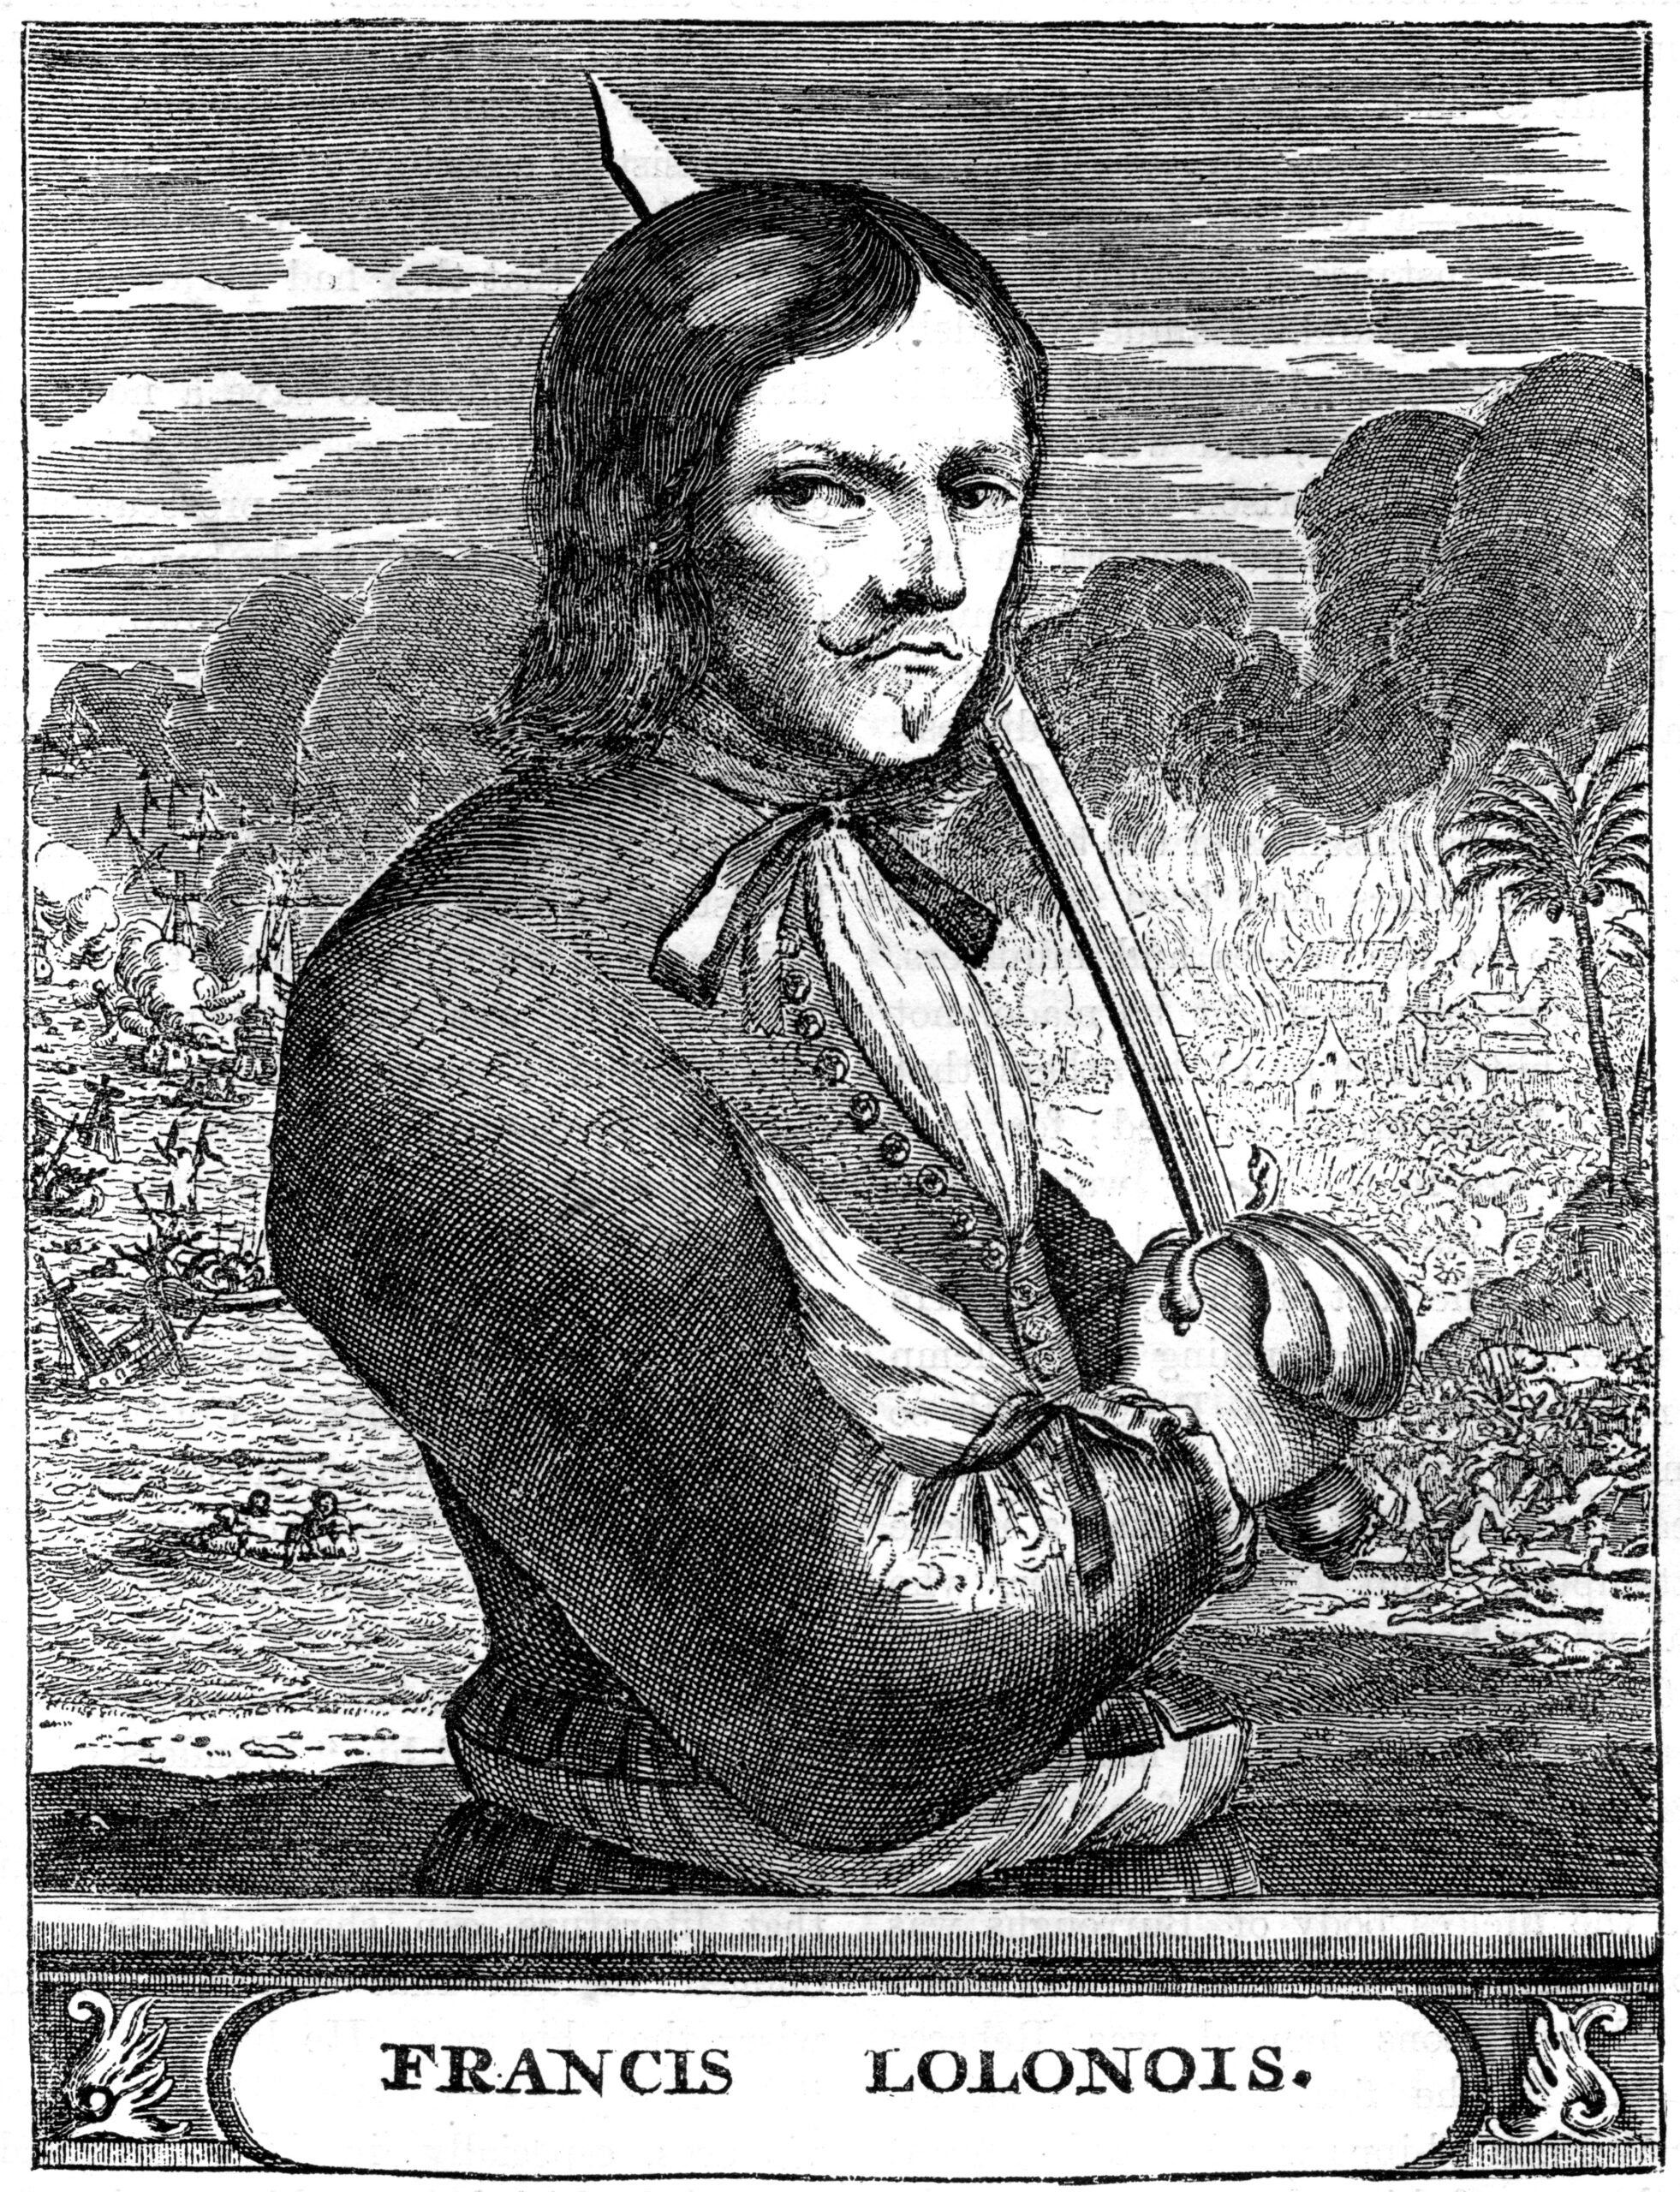 Francois l'Ollonois, 17th century French buccaneer, c1880. L'Ollonois was a notorious pirate noted for his brutality. Operating mainly in the West Indies he progressed from slave to Pirate King. A print from Cassell's History of the United States, by Edmund Ollier, Volume I, Cassell Petter and Galpin, London, c1880. (Photo by The Print Collector/Print Collector/Getty Images)